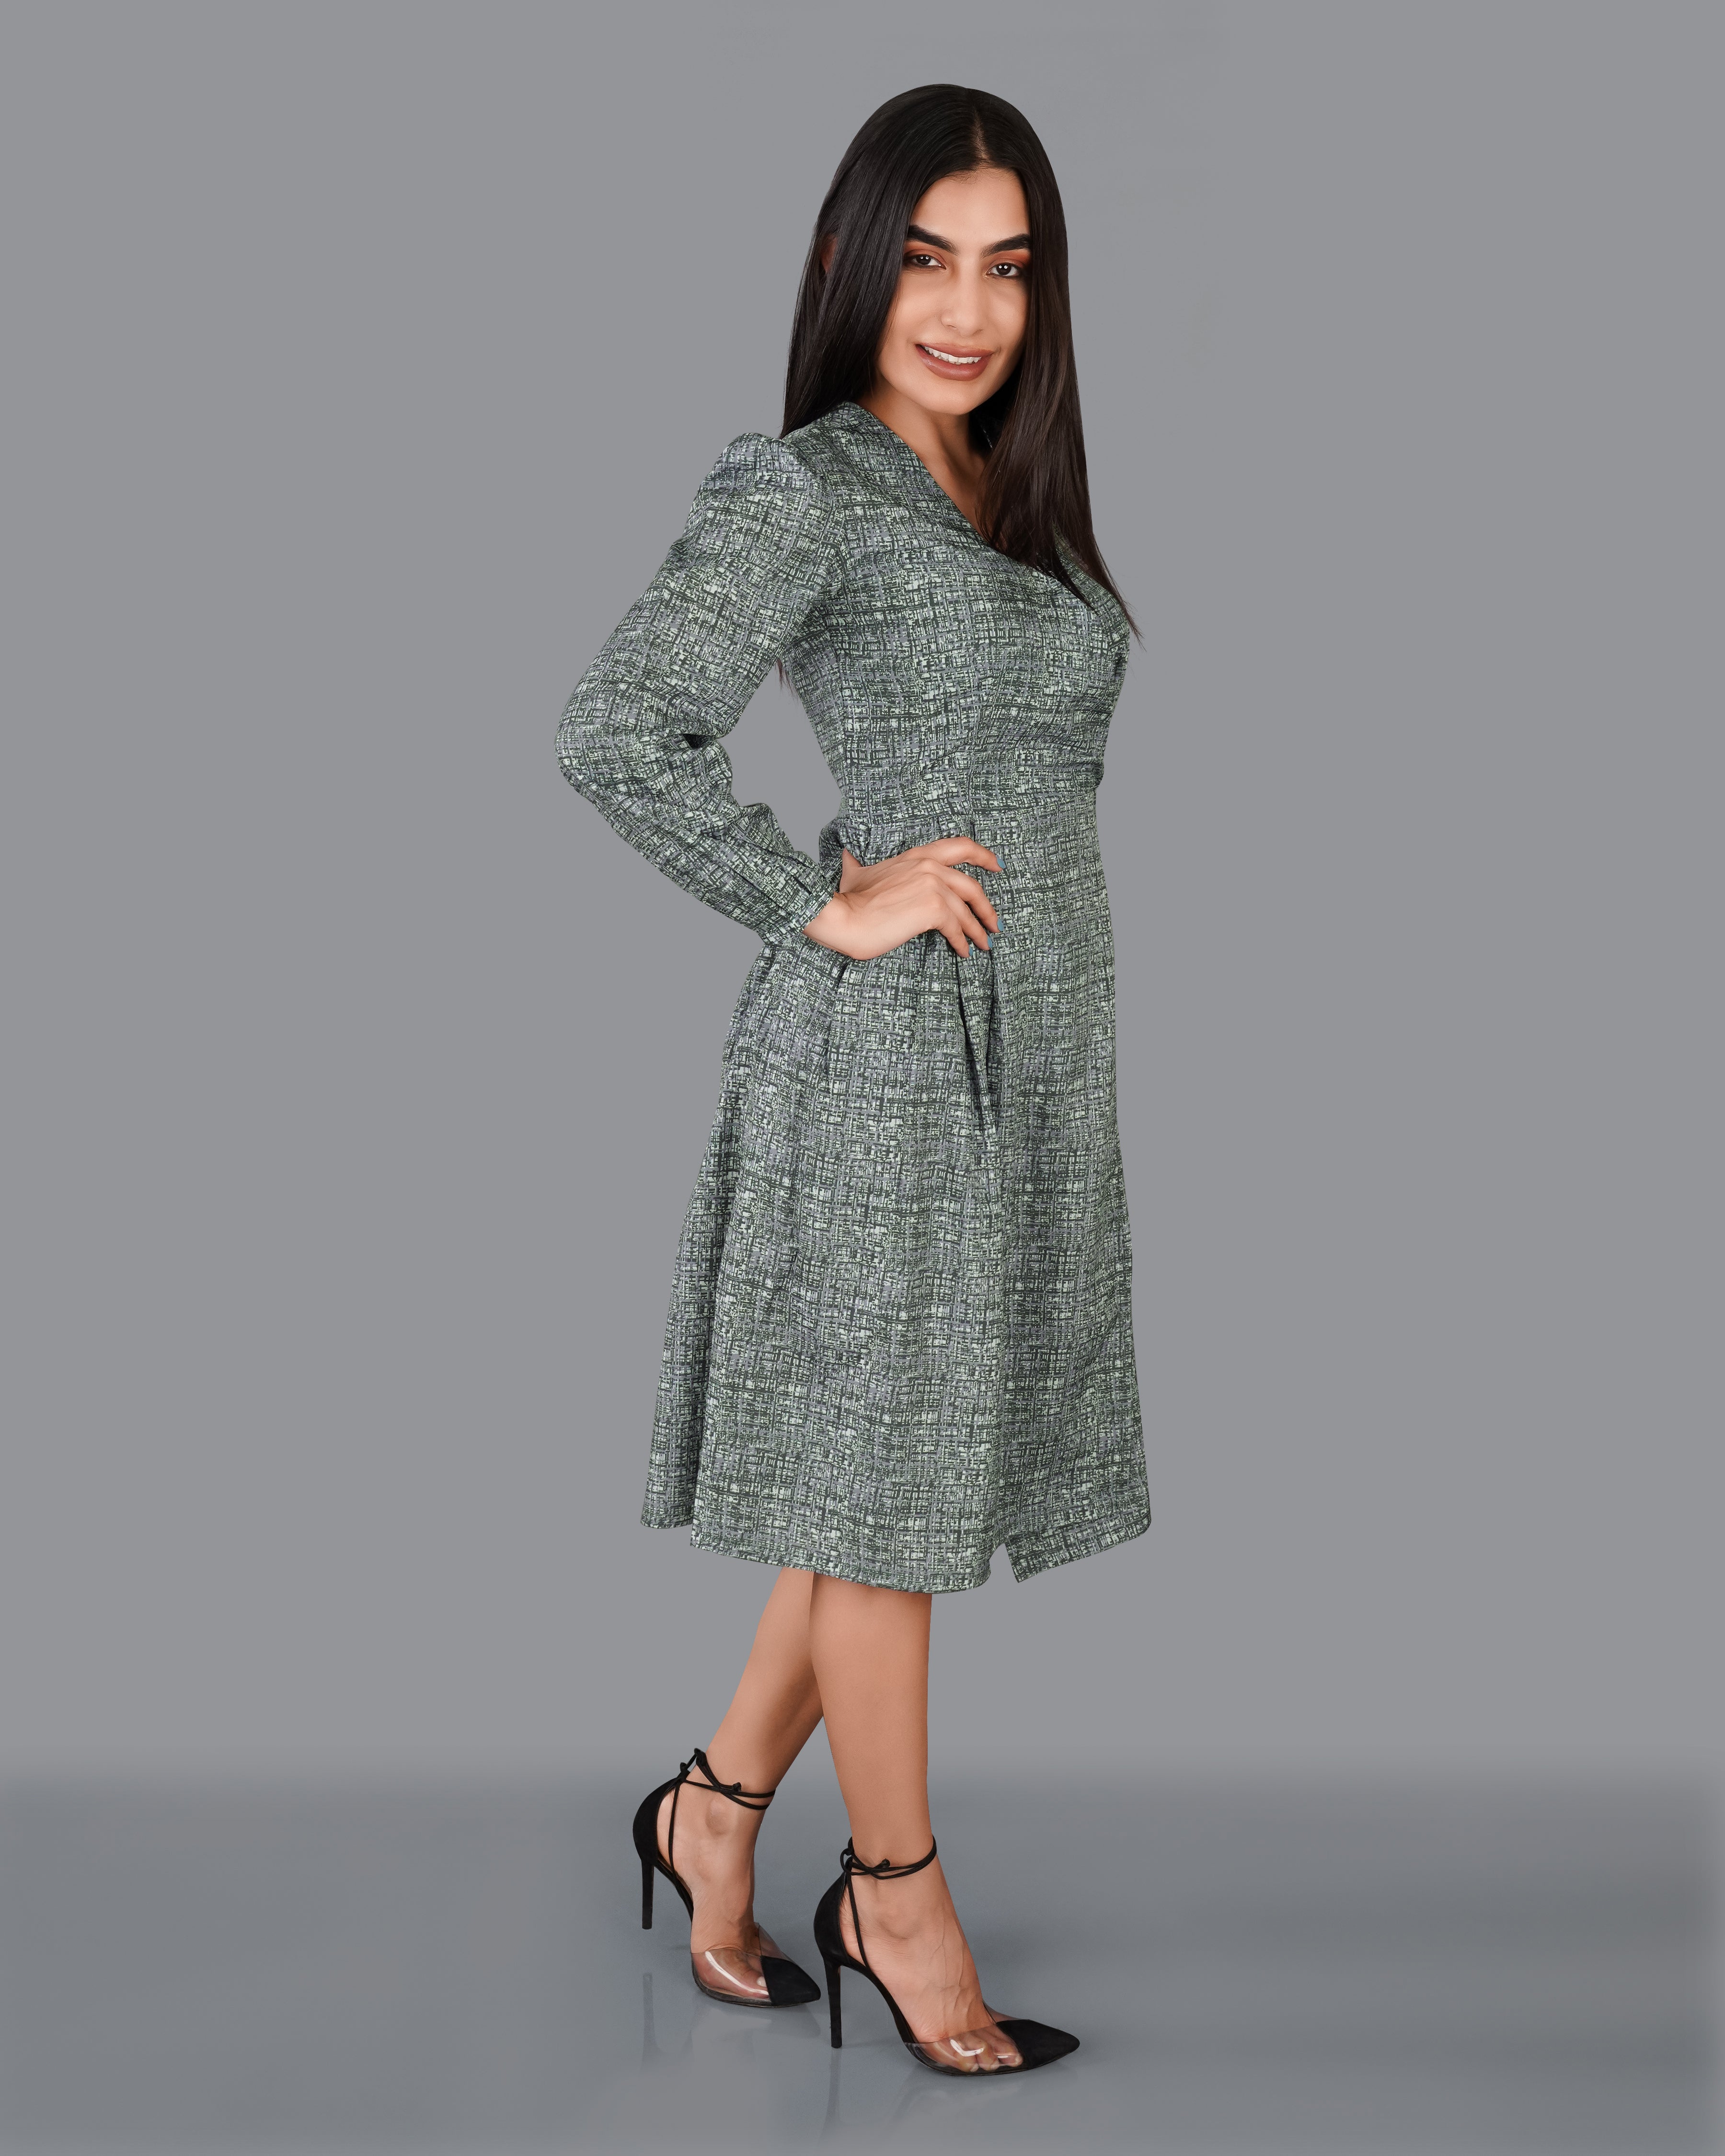 Gravel with Pumice Green Flared Dress WD031-32, WD031-34, WD031-36, WD031-38, WD031-40, WD031-42